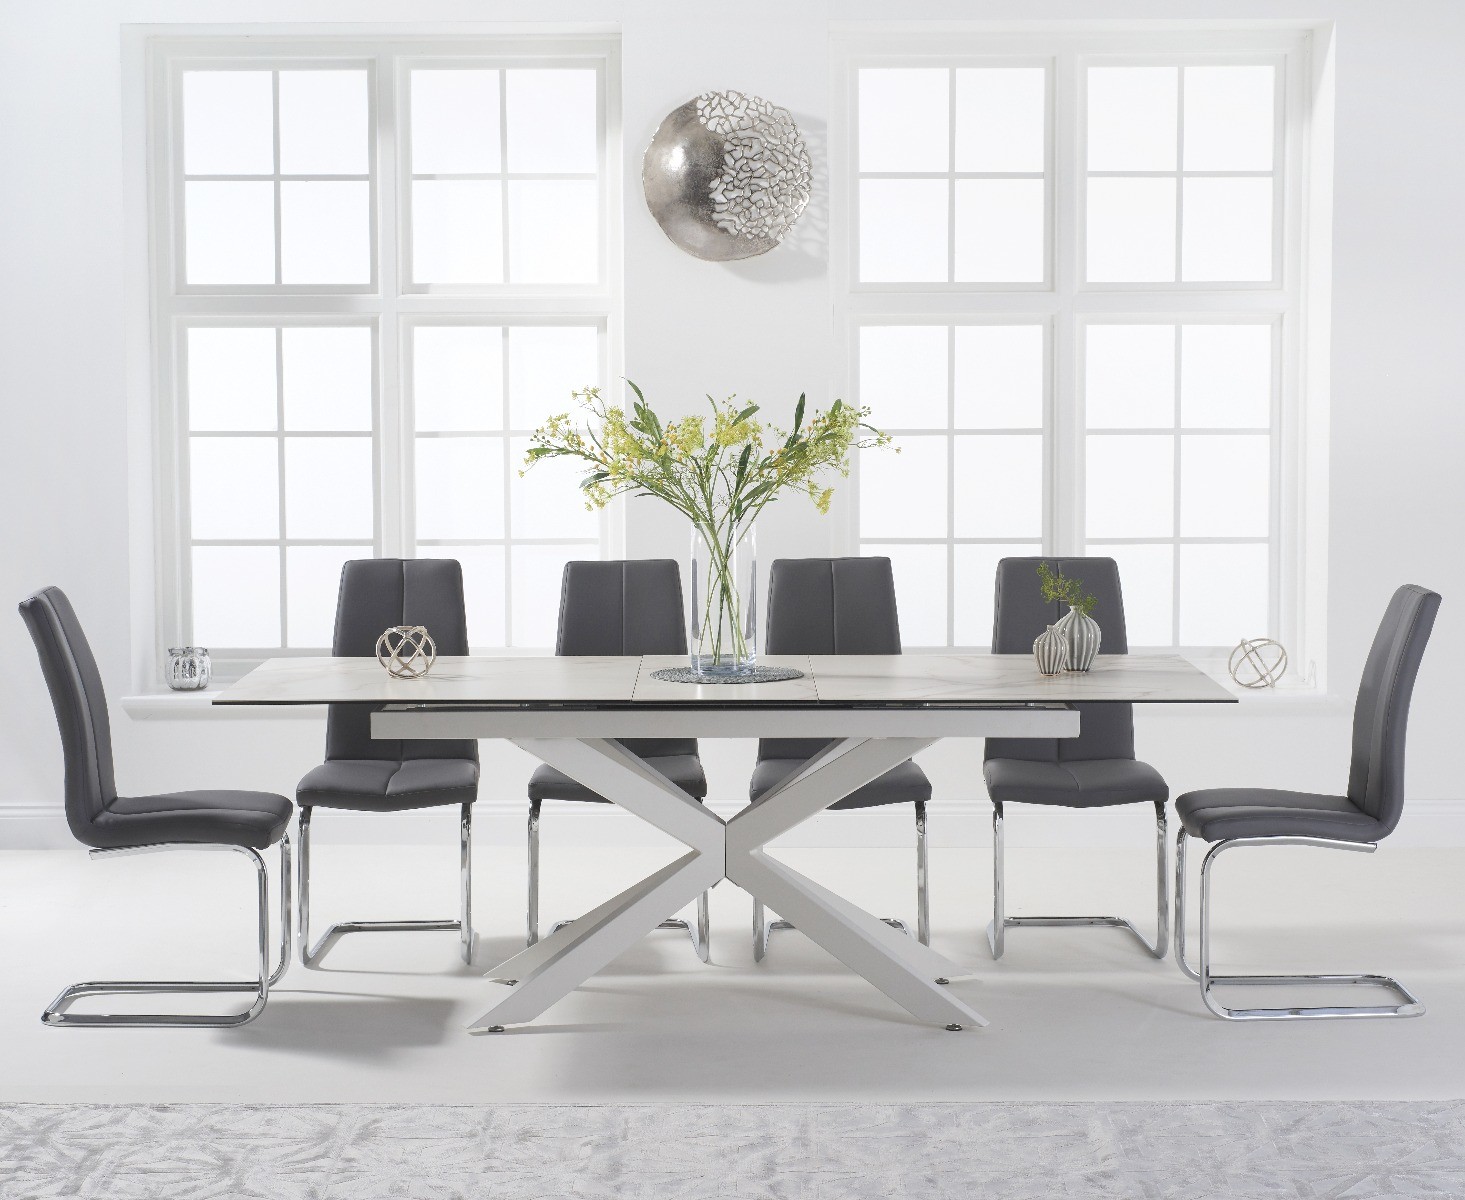 Boston 180cm White Leg Extending Ceramic Dining Table With 10 Grey Tarin Chairs